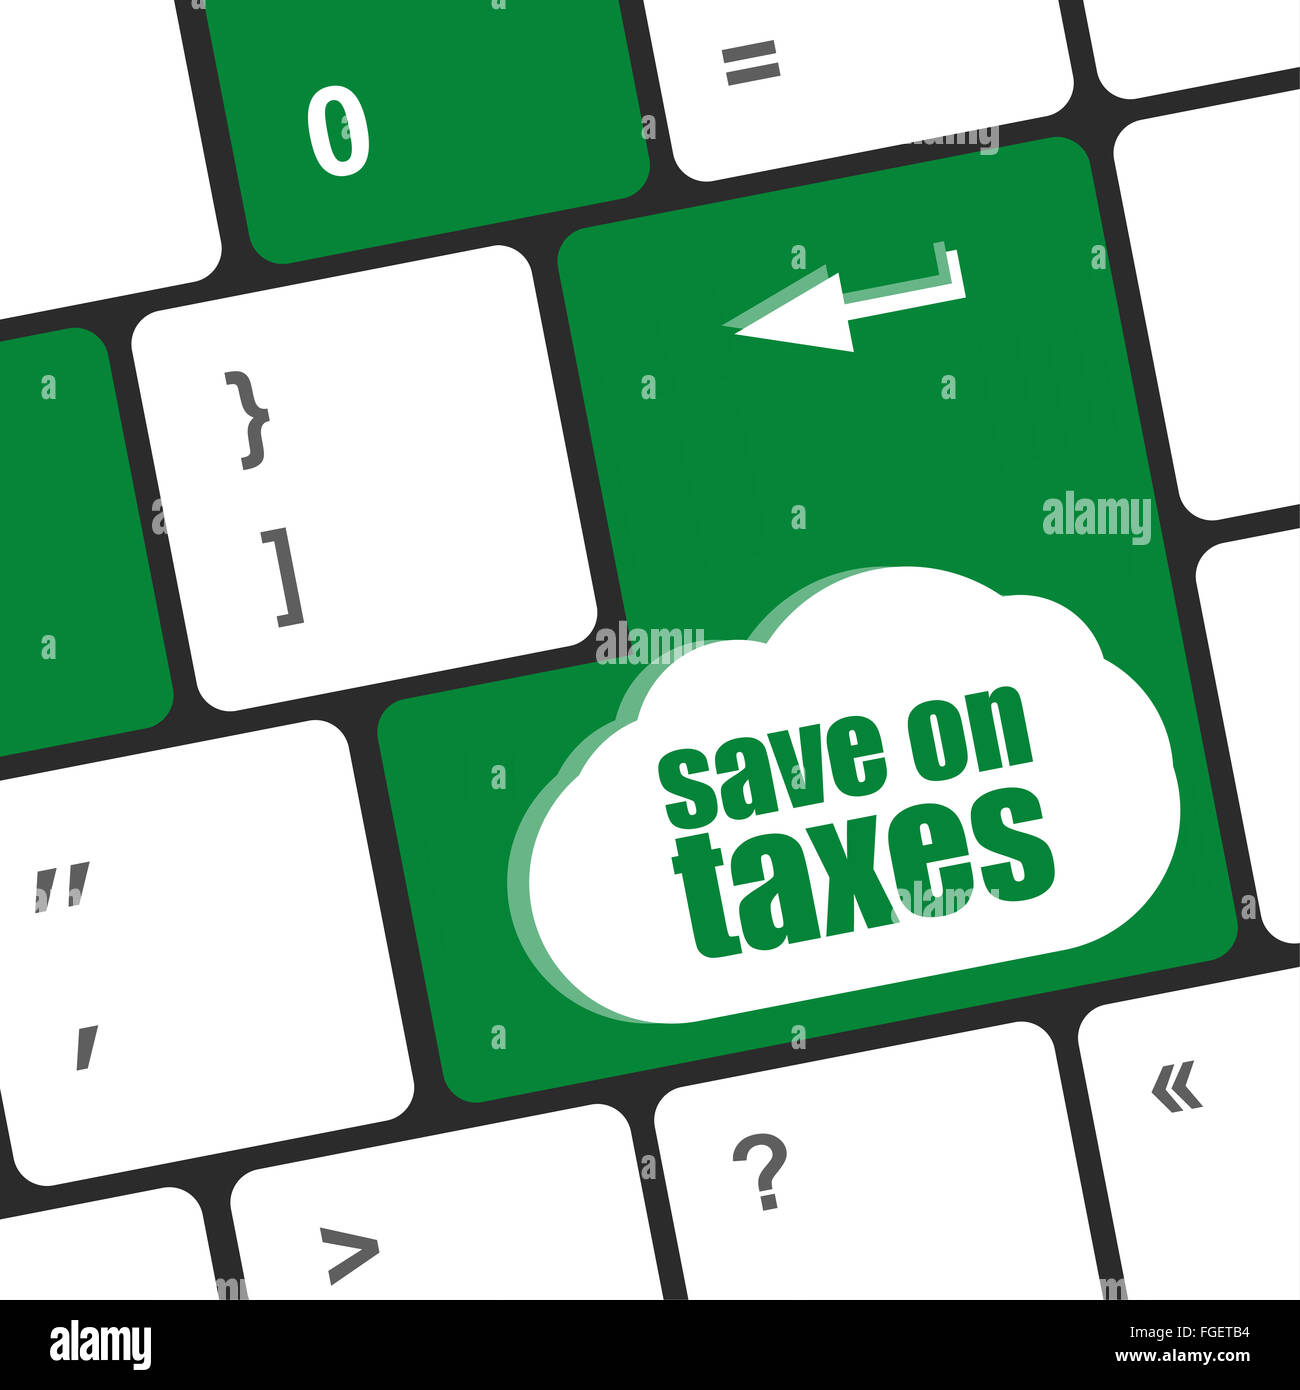 save on taxes word on laptop keyboard key, business concept Stock Photo